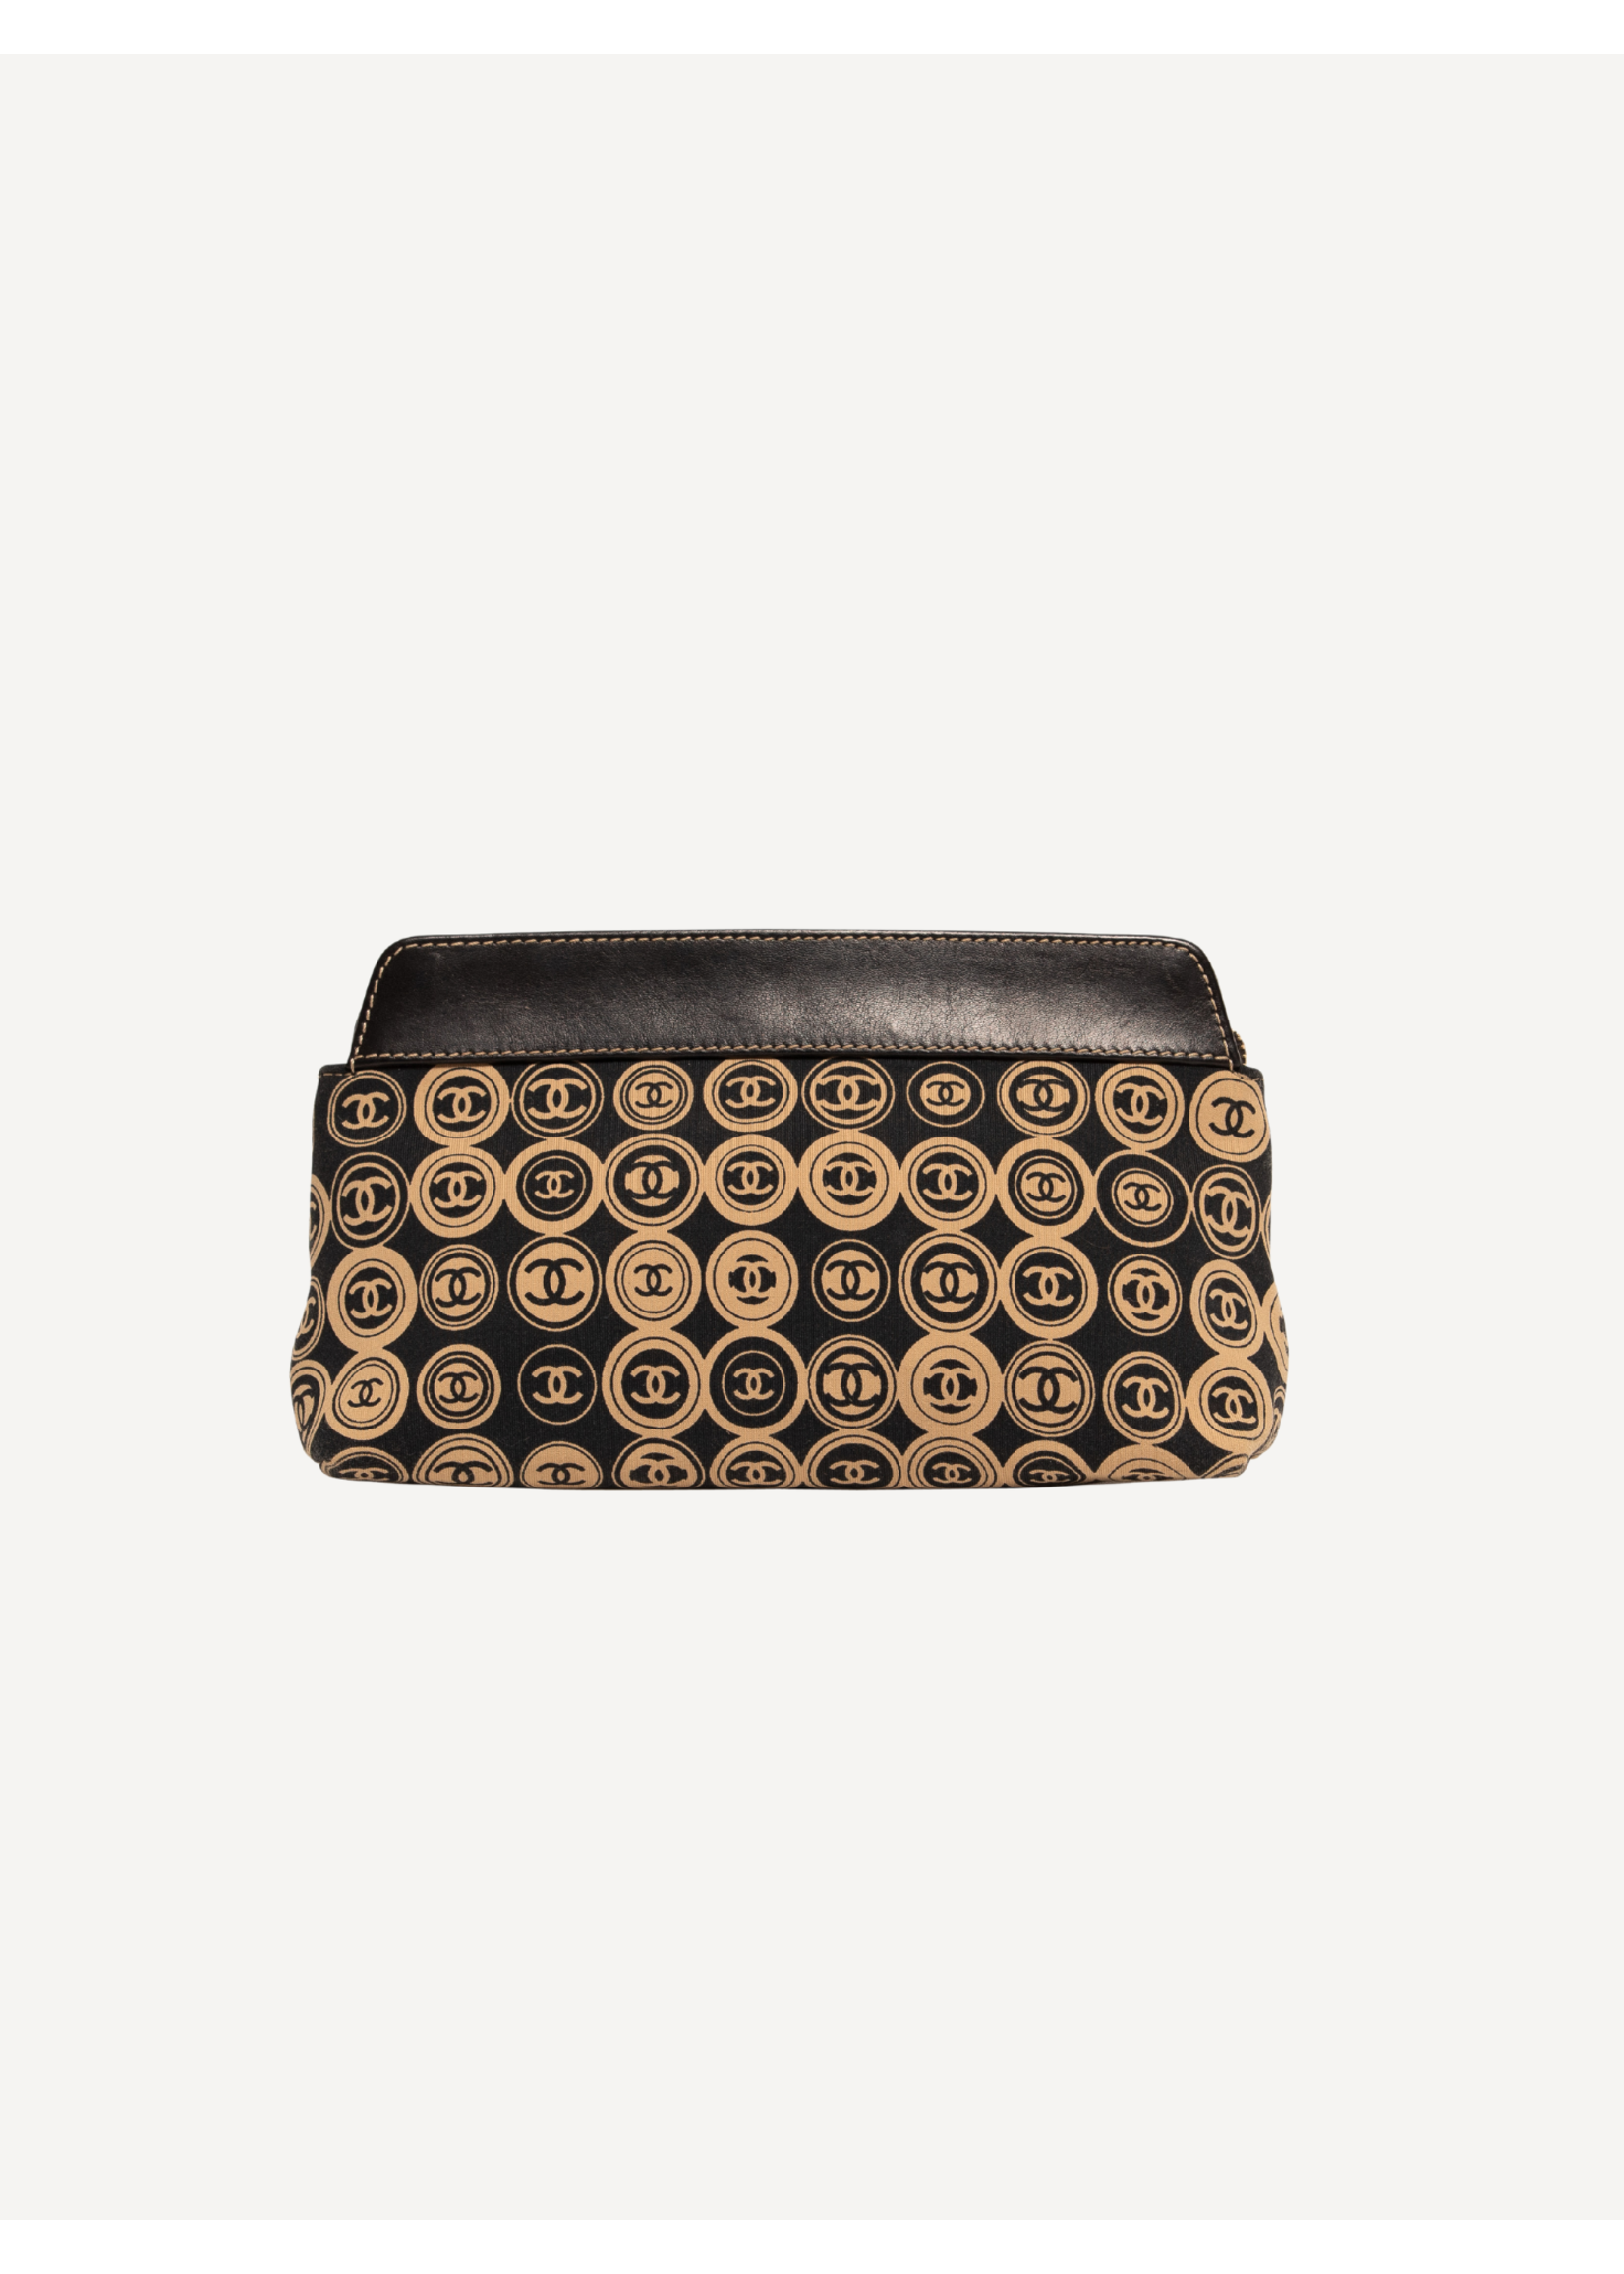 Wyld Blue Vintage Chanel CC Clutch Black and Gold